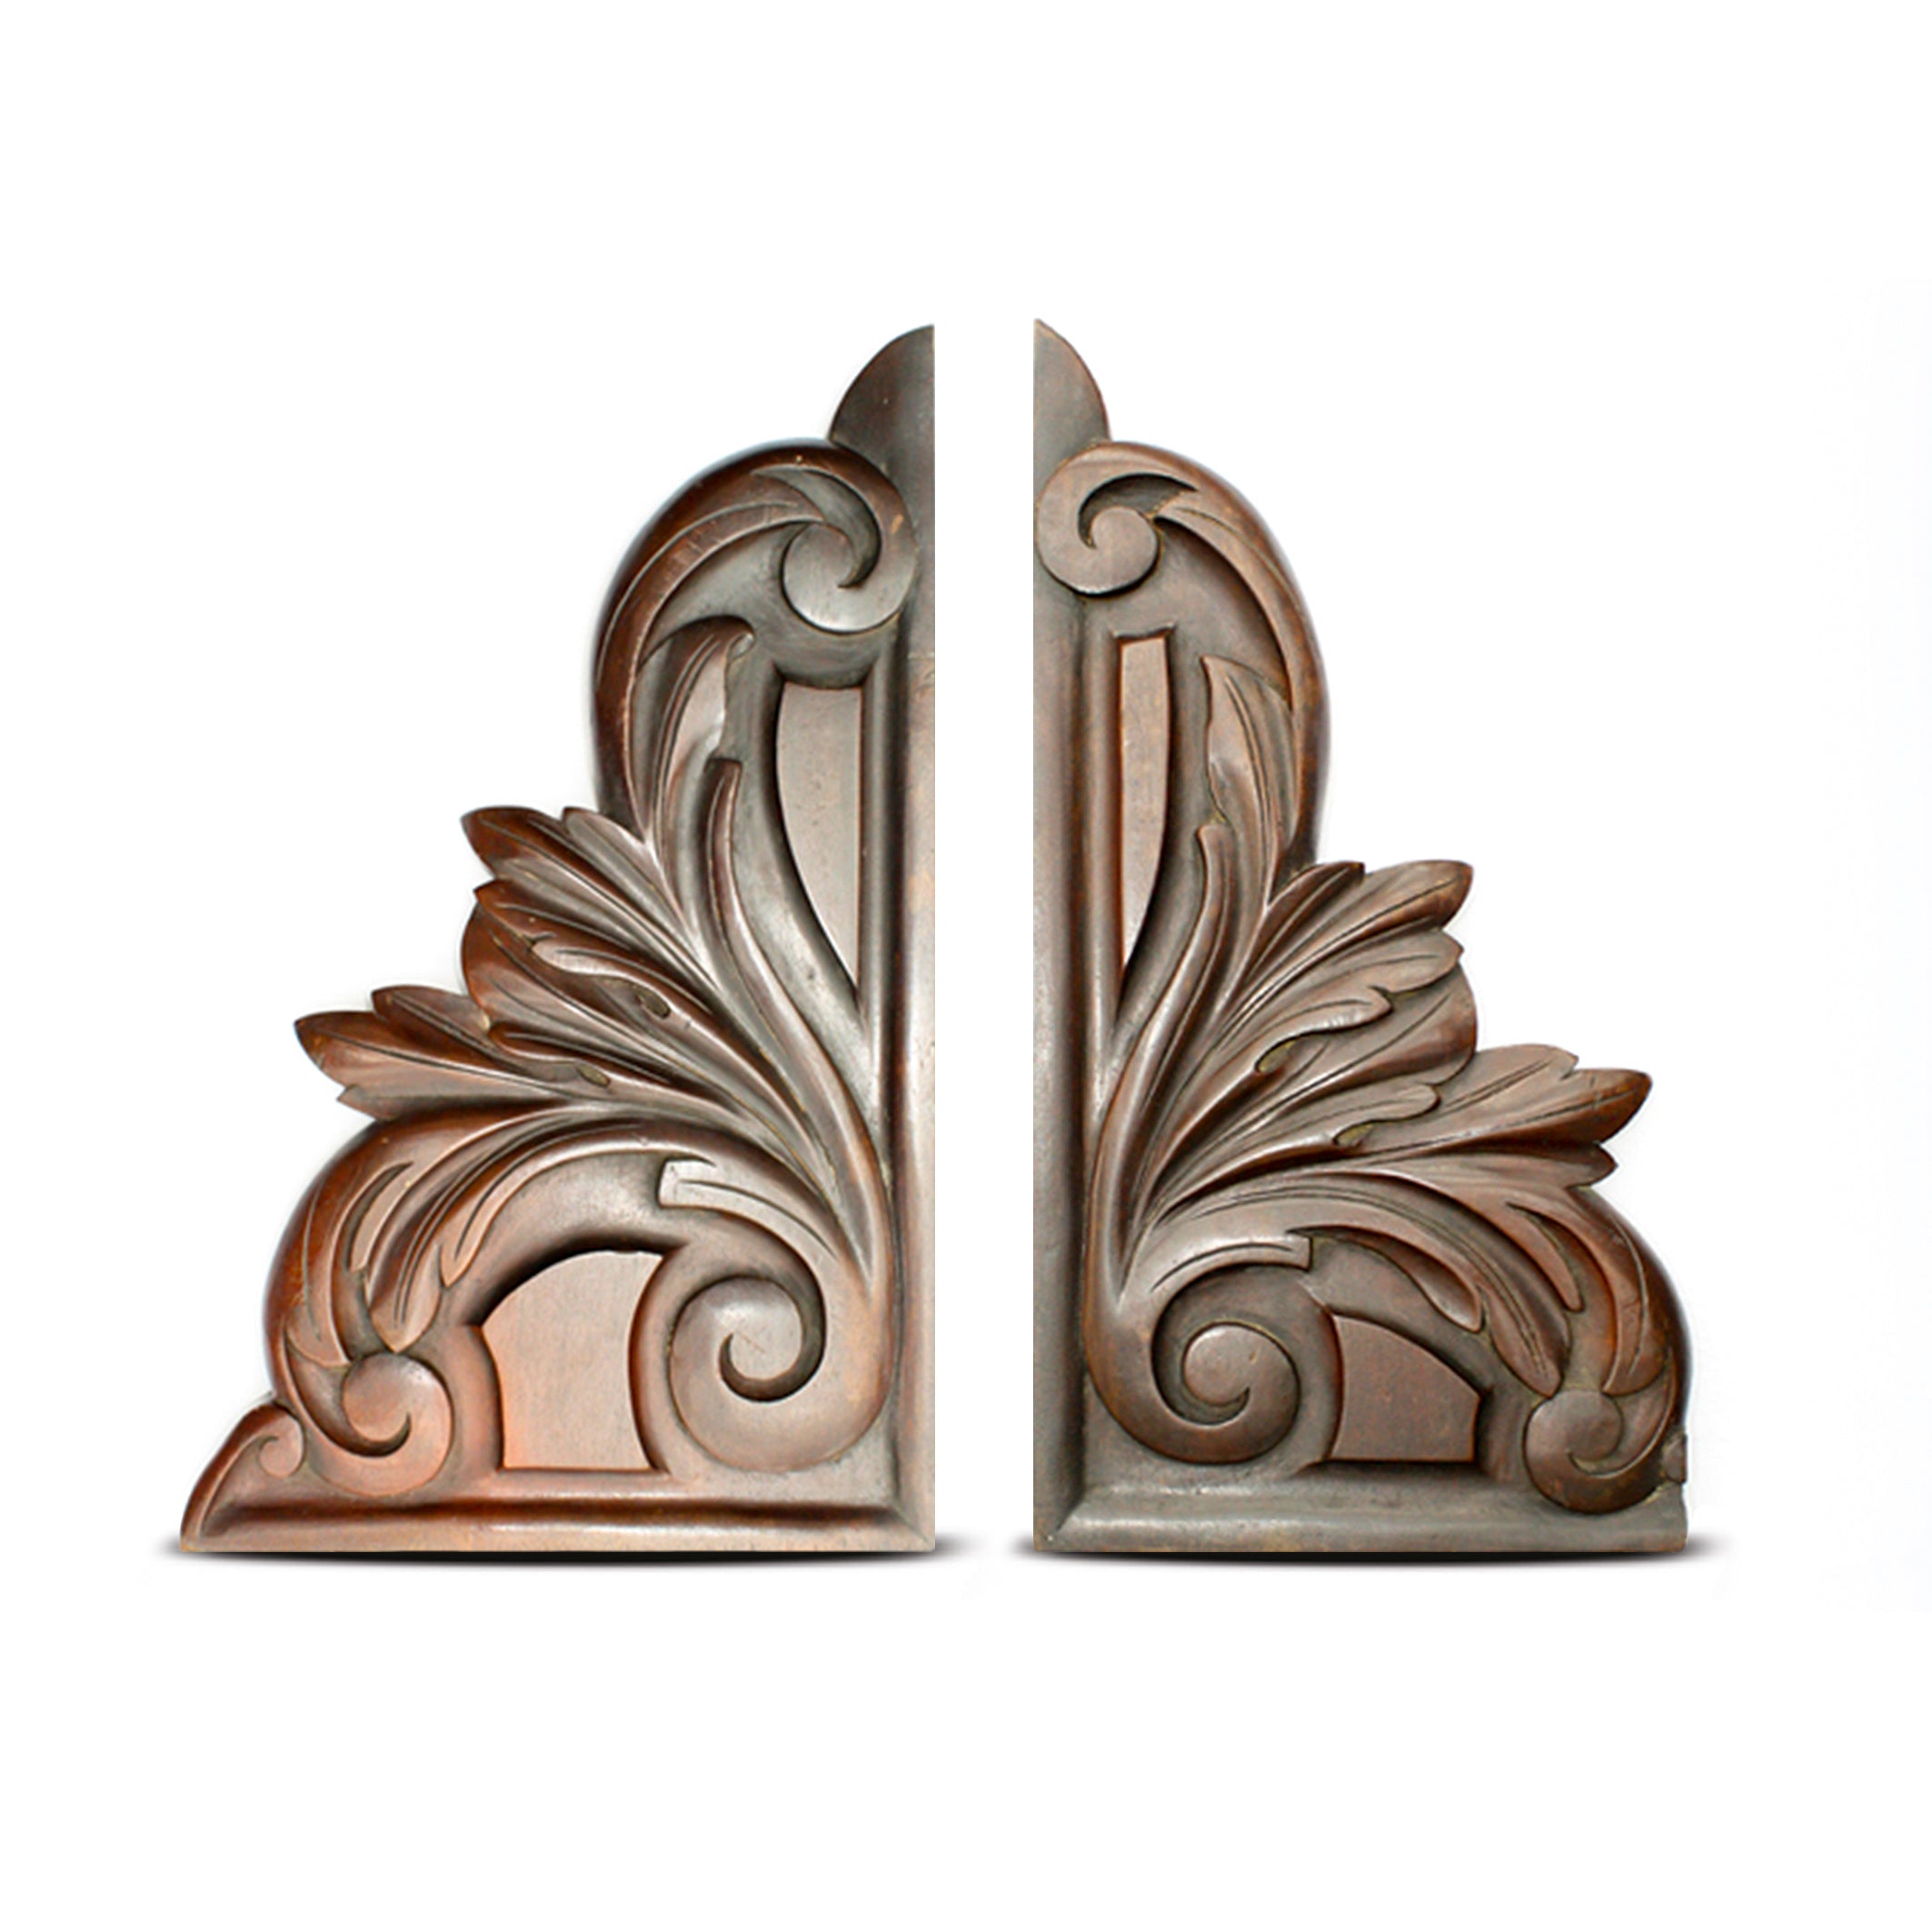 A pair of decorative antique French Carved Corner Brackets. Find this and other Beautiful Vintage items for you home at Intovintage.co.uk.